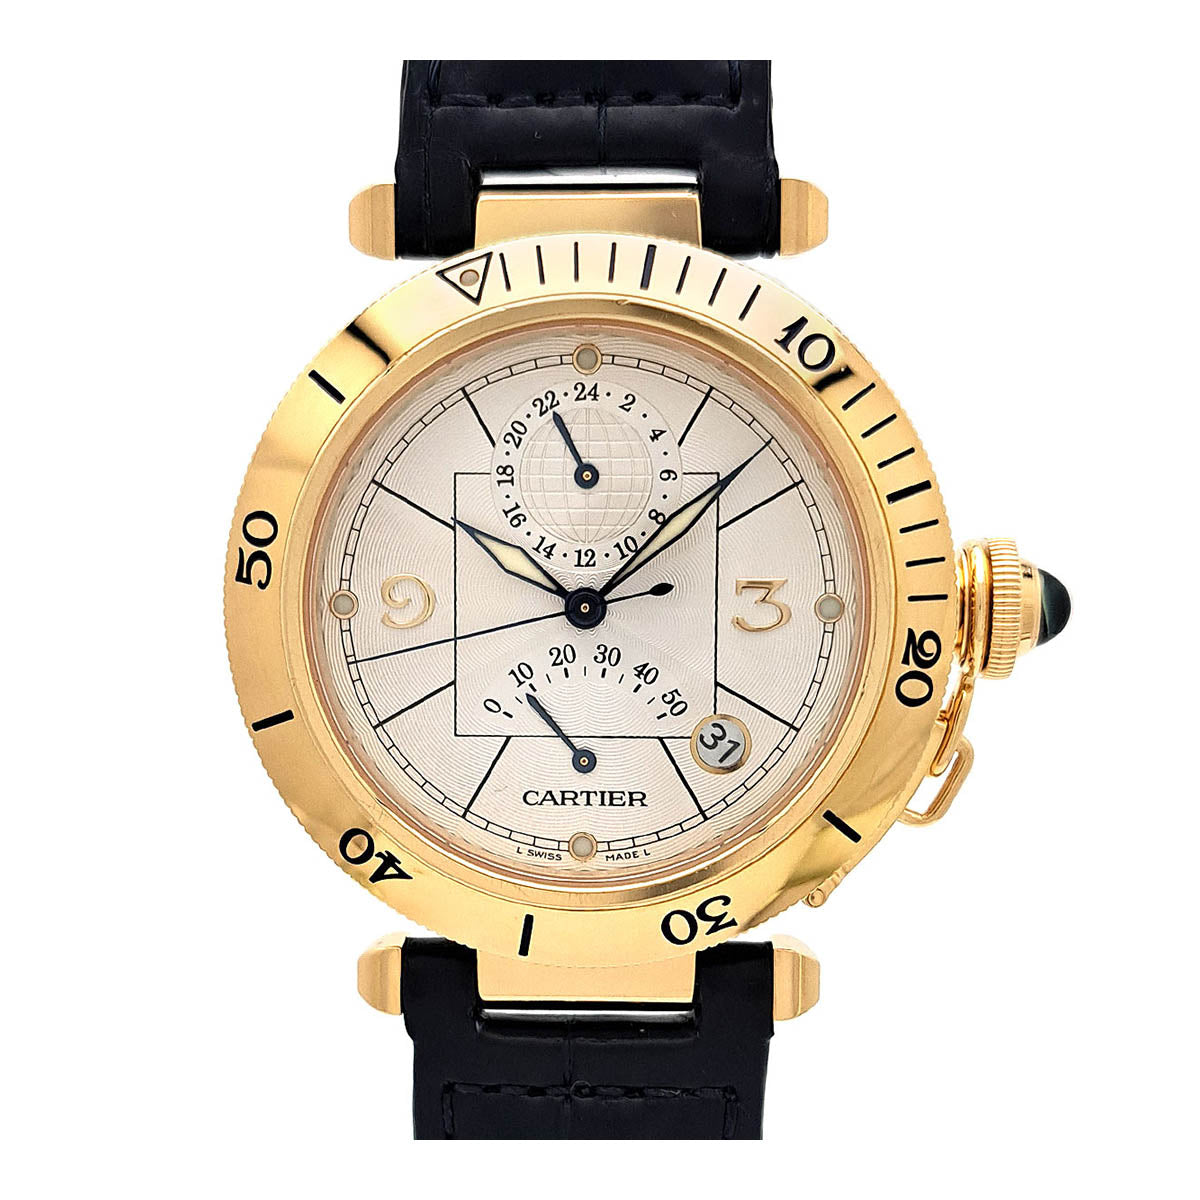 Cartier Pasha GMT with Power Reserve Men's Watch W3014456, Automatic, Yellow Gold (Pre-Owned) W3014456